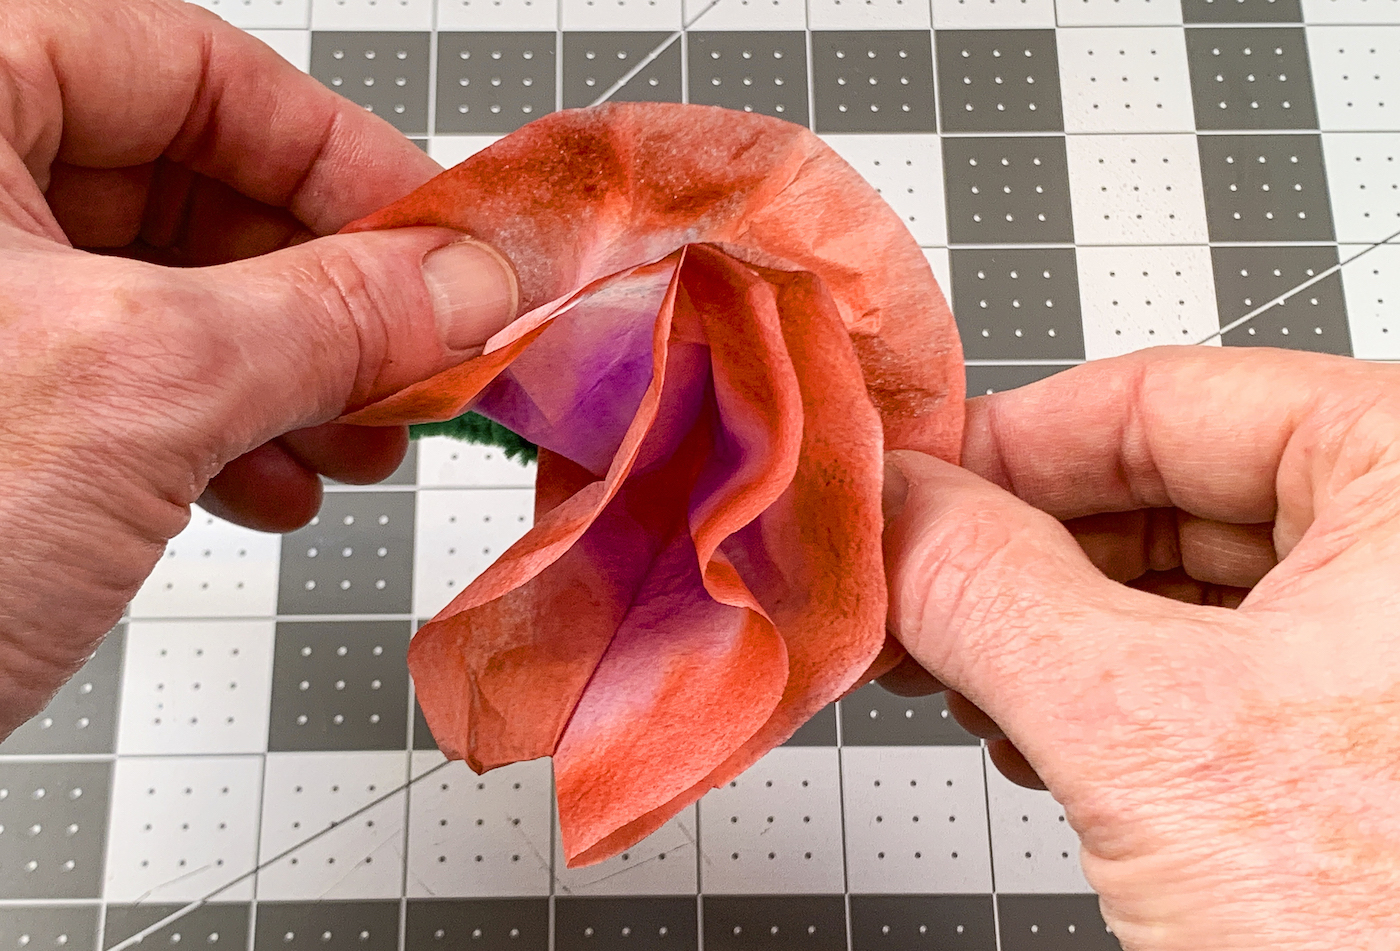 Pulling apart the coffee filter layers to create a flower